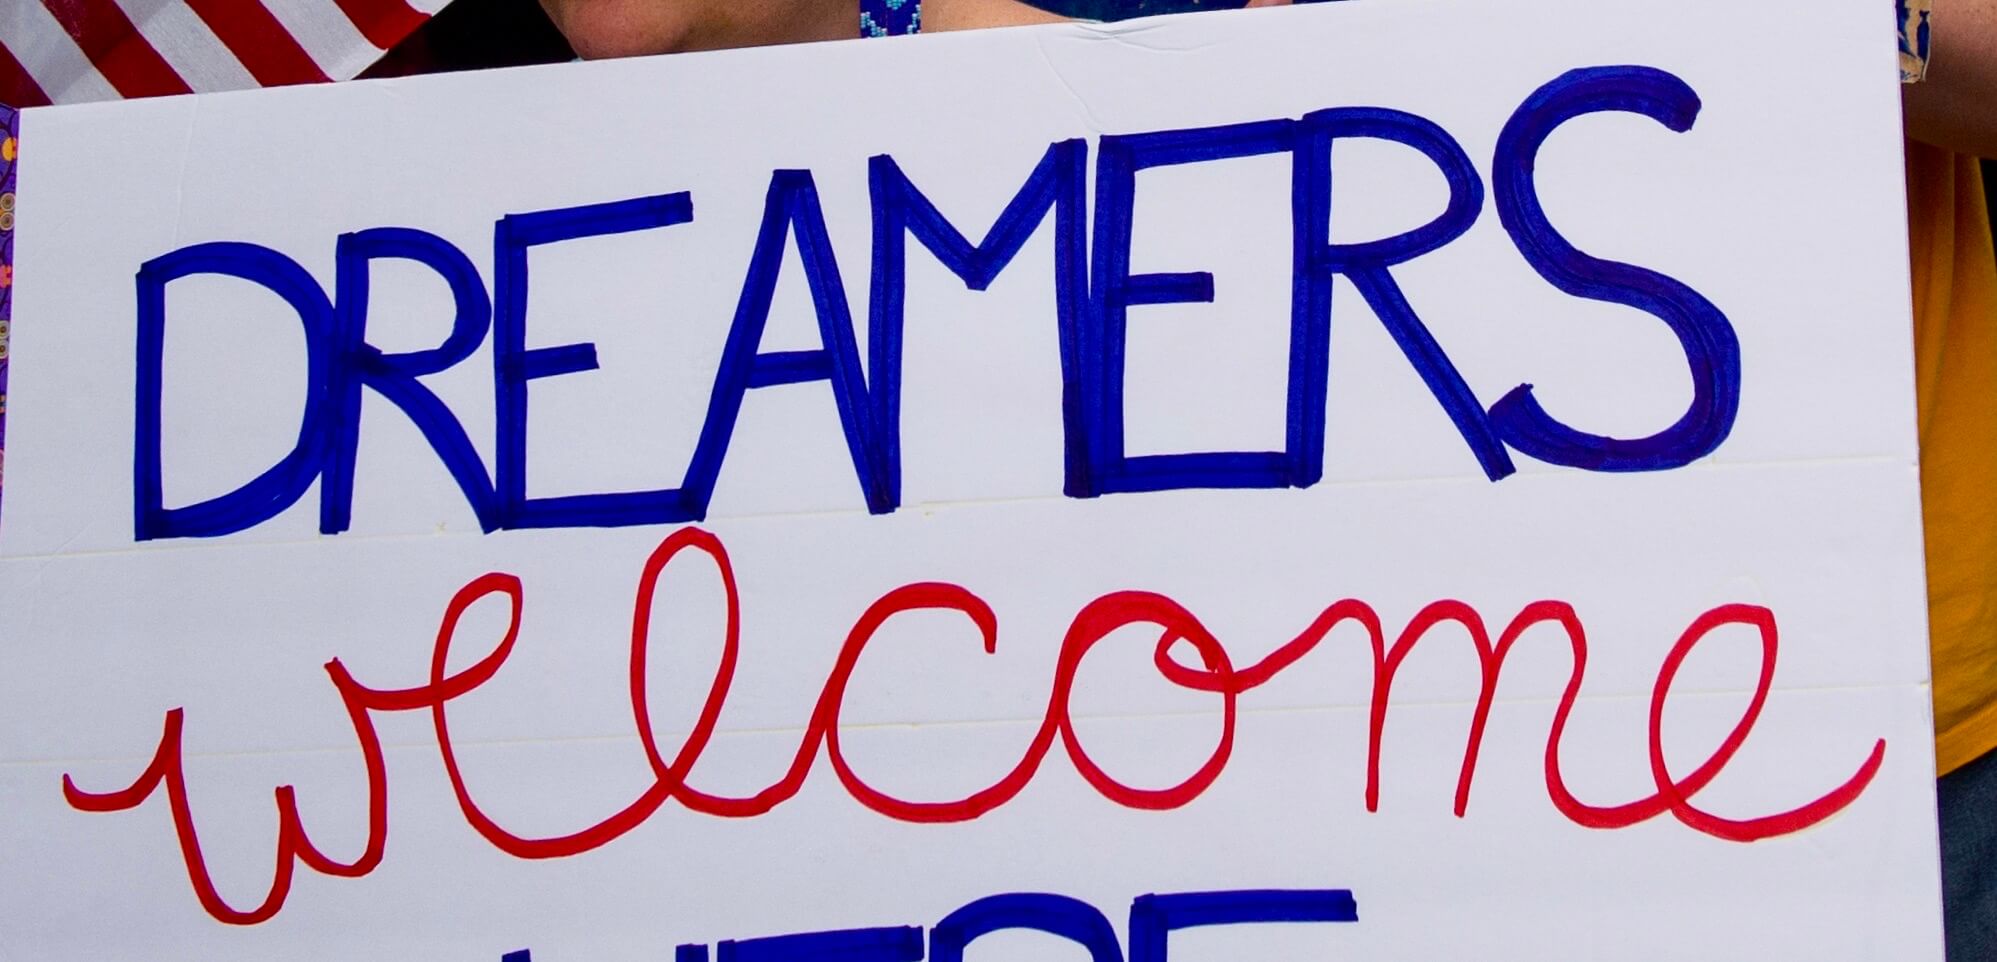 Sign from a protest for DREAMERs, a term for recipients of DACA